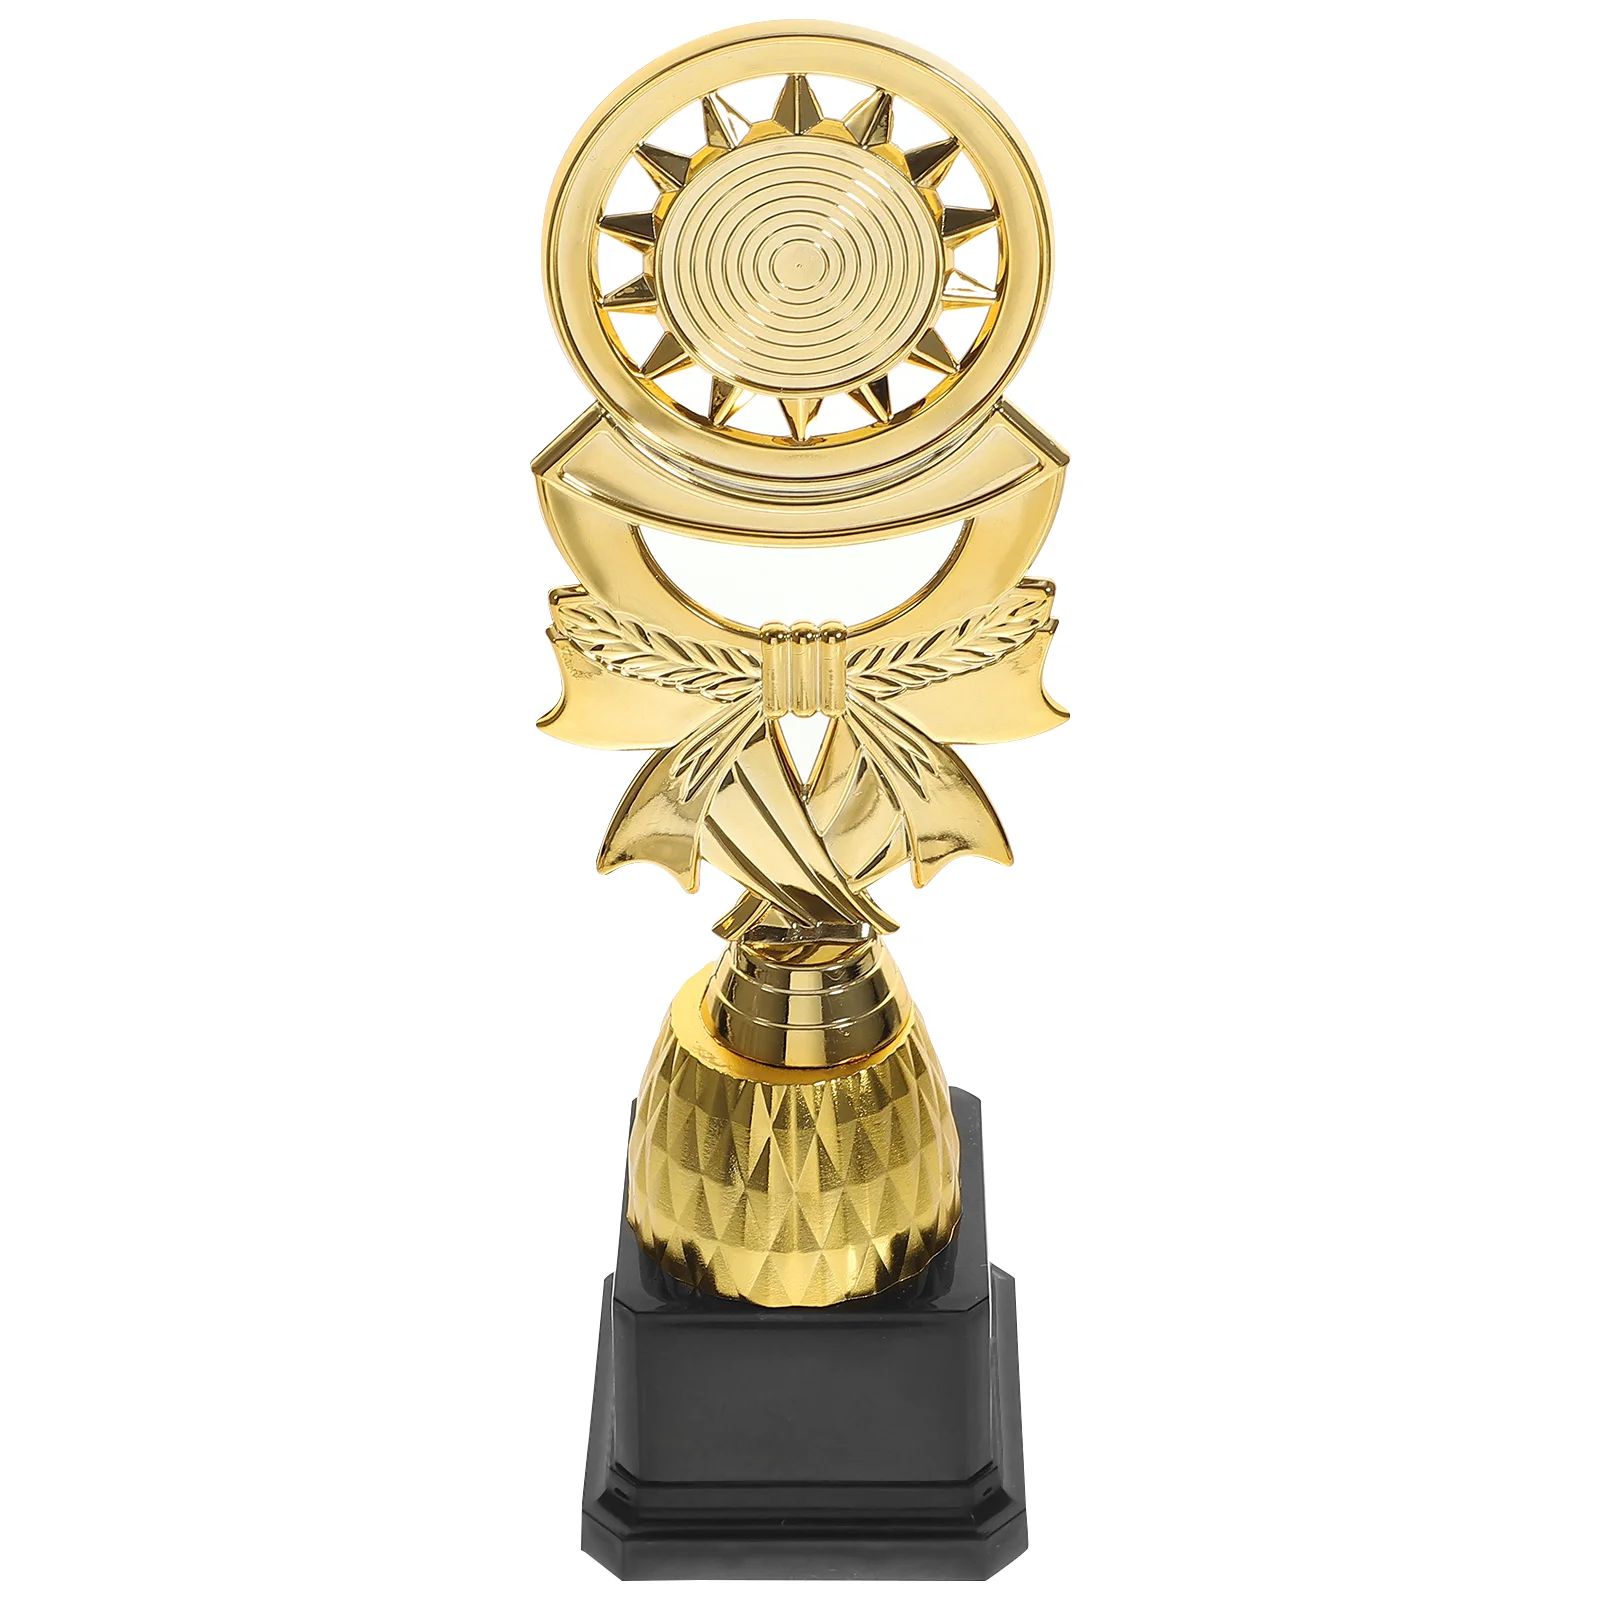 

Trophy Funny Poppa Gifts Competition Plastic Trophies Kindergarten Graduation Basketball Medals Award